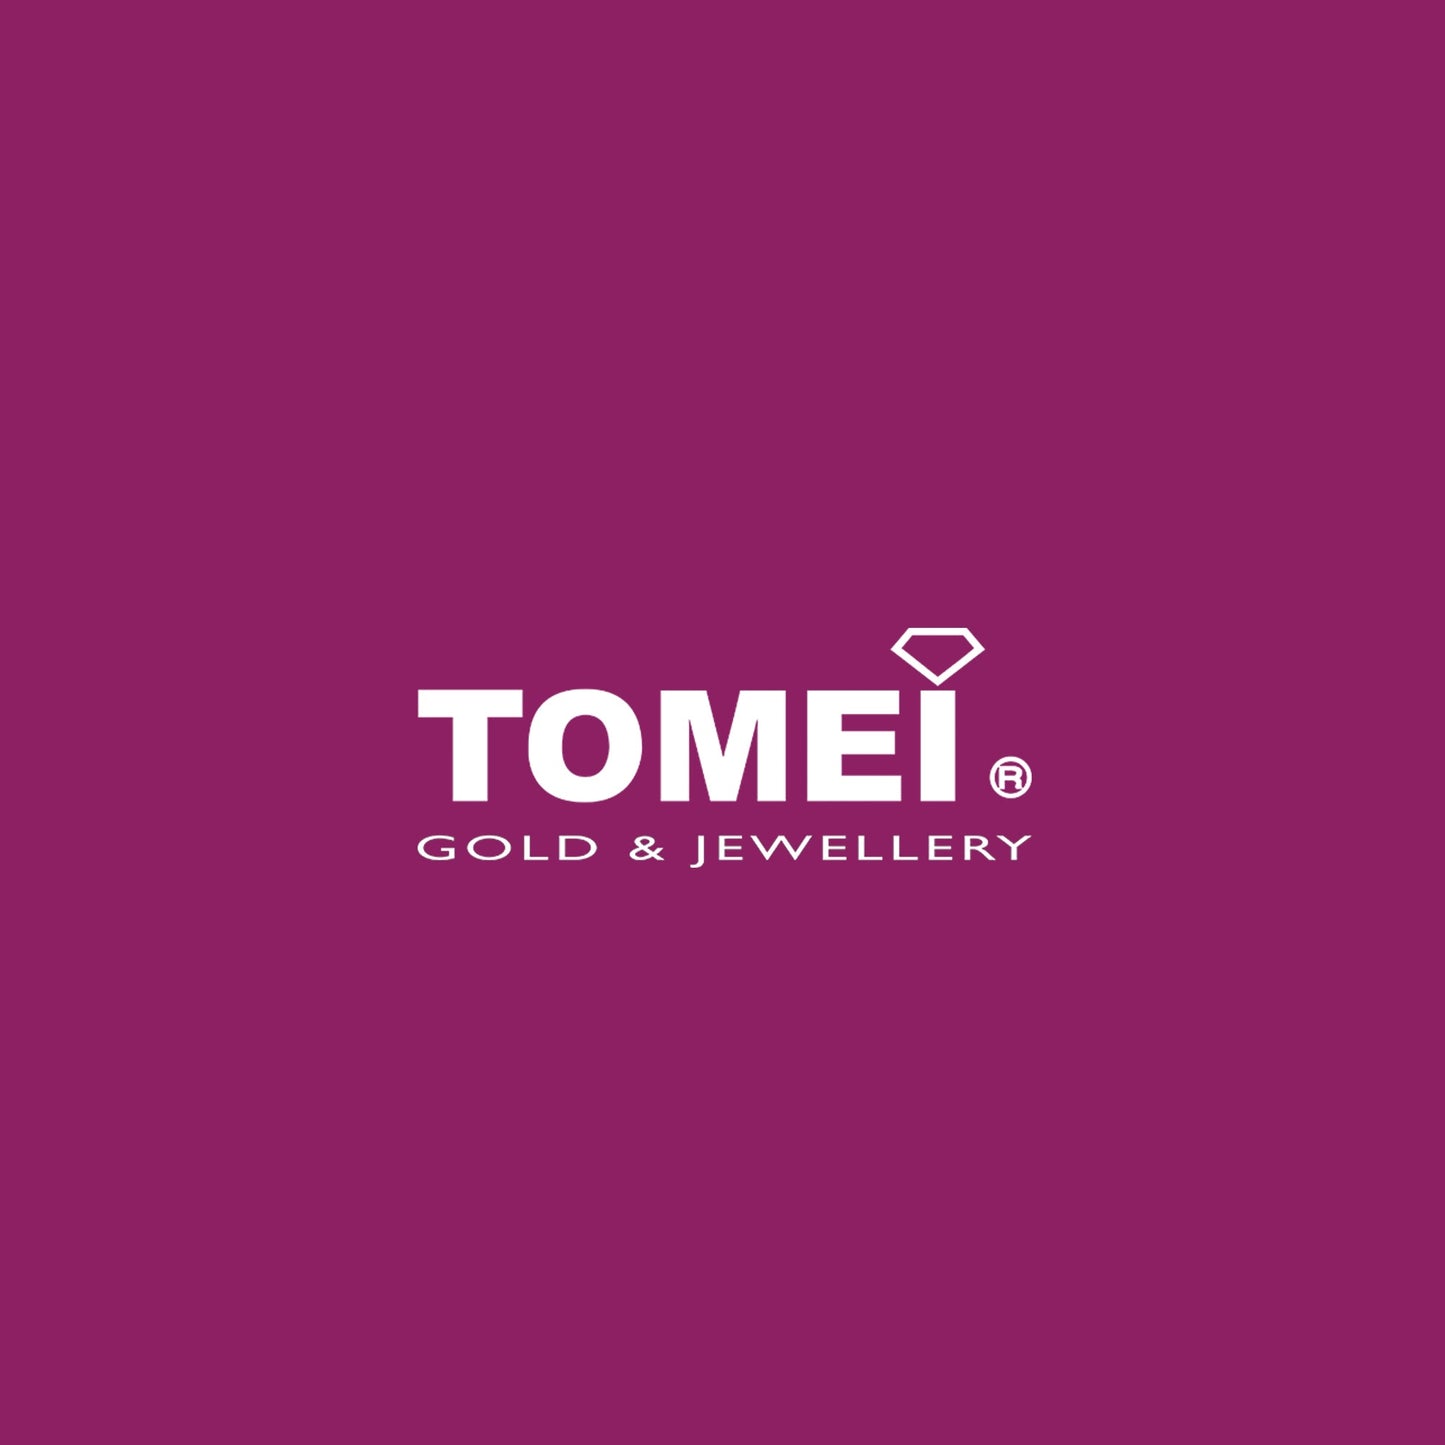 TOMEI Sweet Blessings Goat Pendant, Yellow Gold 916